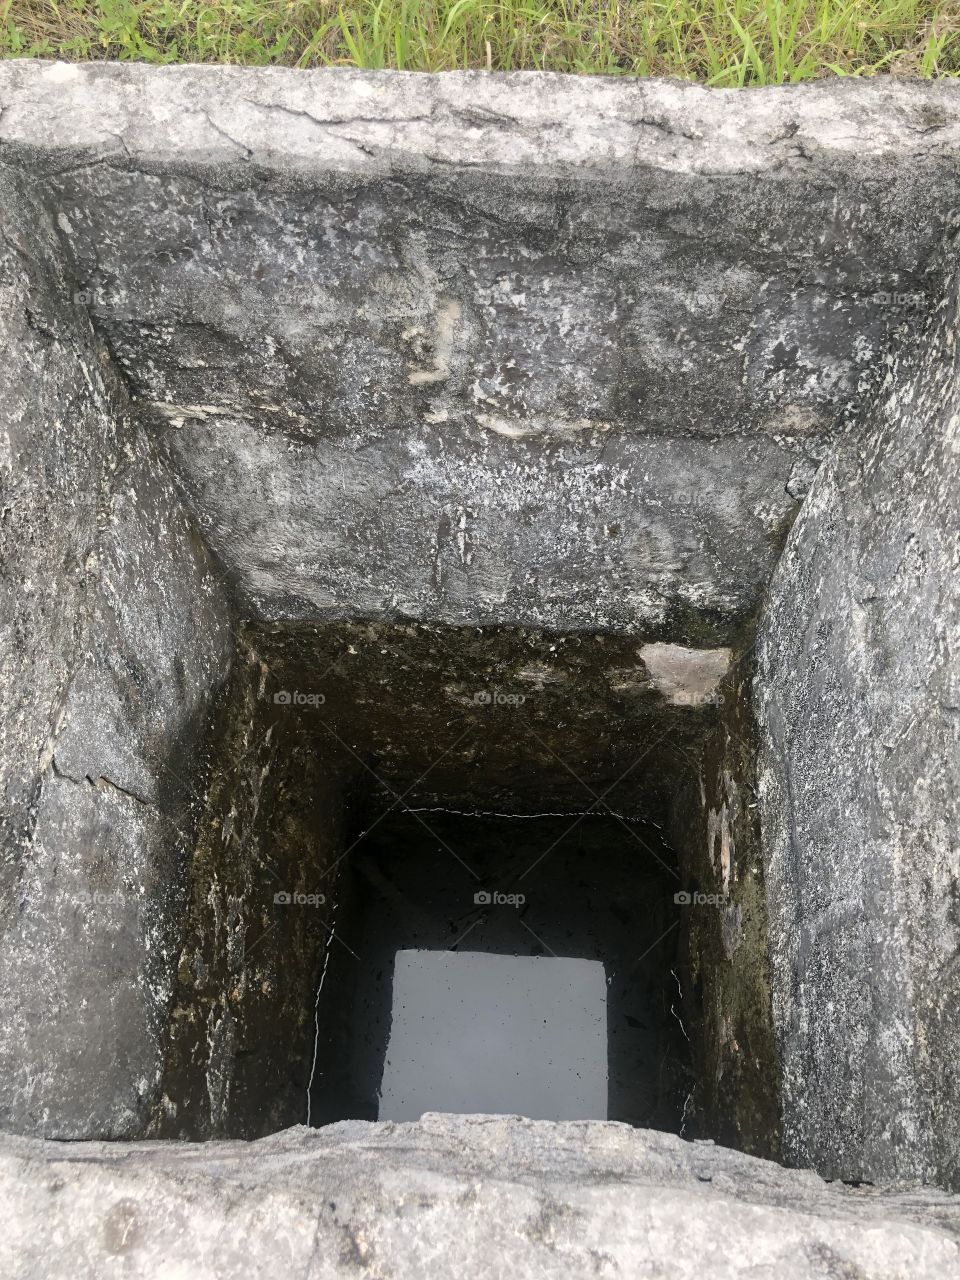 Square shape this well was used by locals for ablution and cleaning purpose. Well was made of lime stone more than 450 years ago. A nice local treasure, found in Haa Dhaalu. Nolhivaramfaru #maldives. 